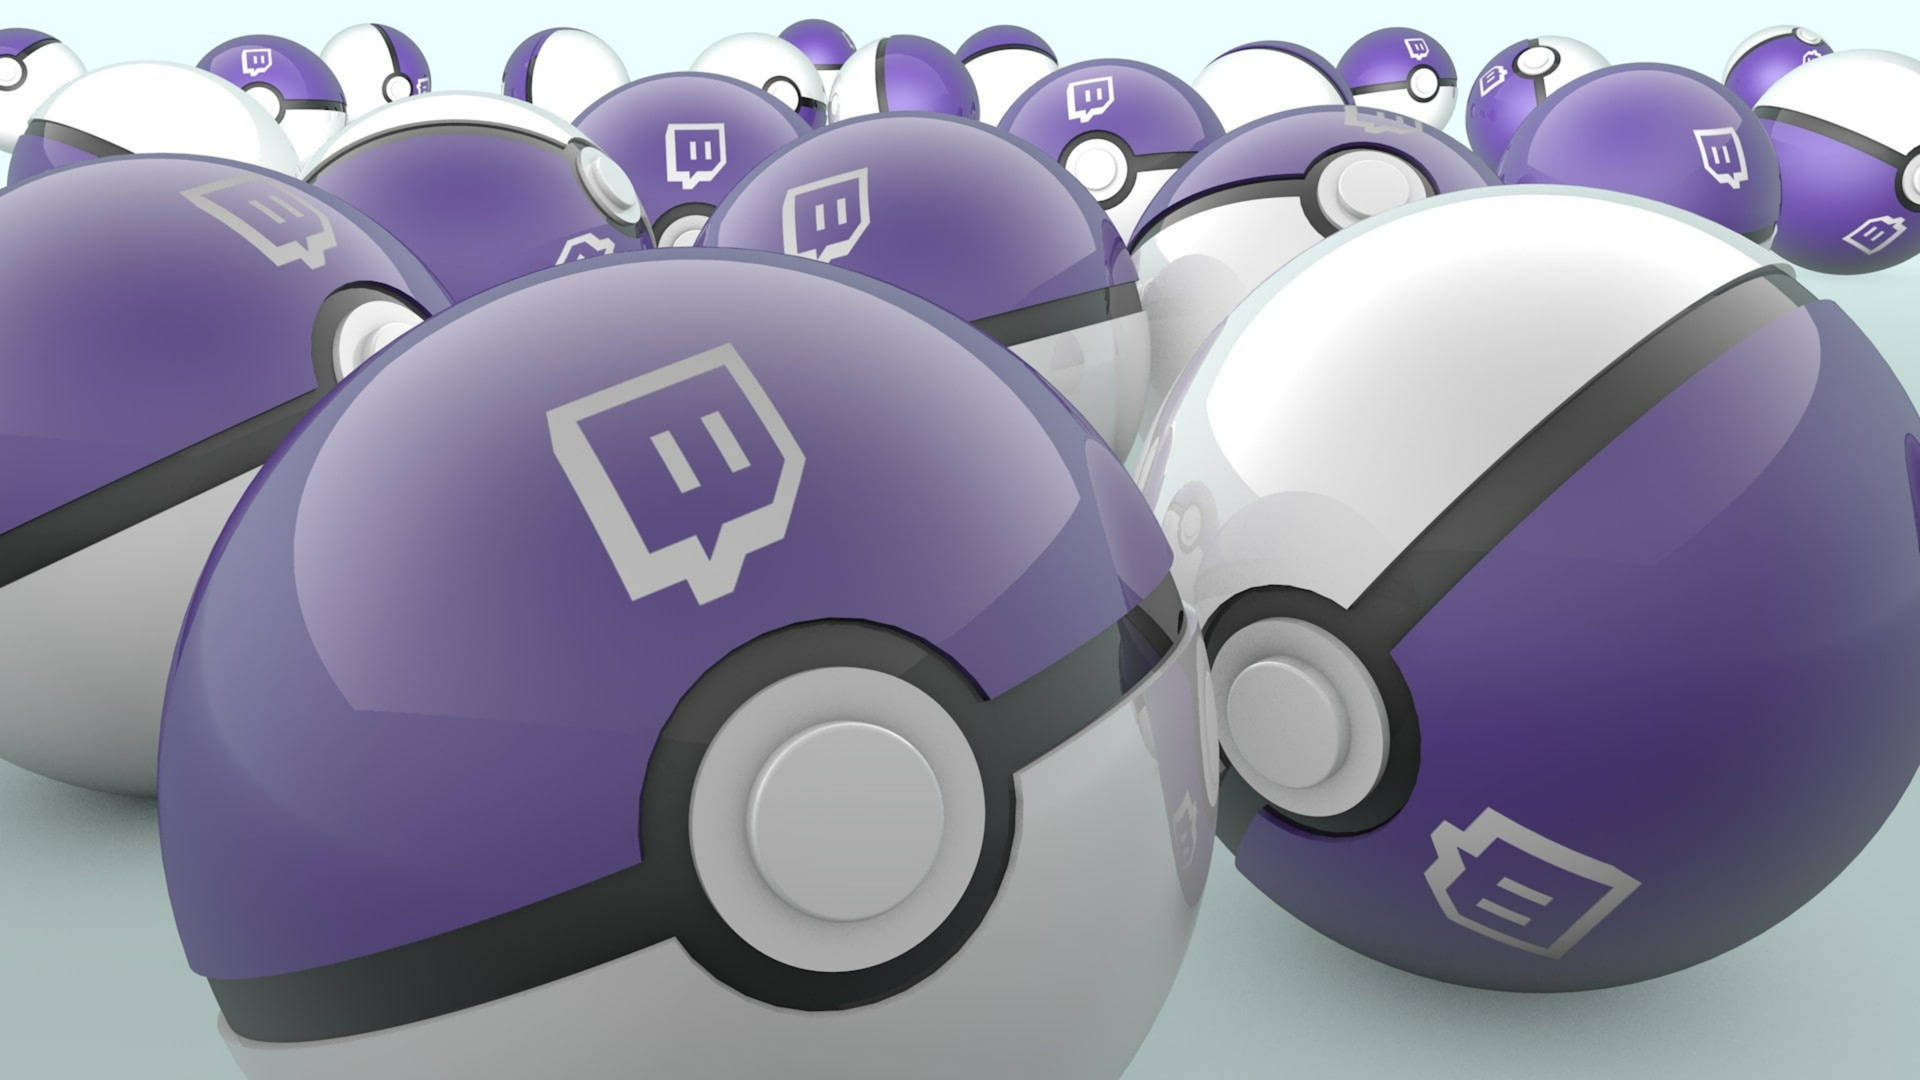 Twitch Icon In Pokeball Wallpaper